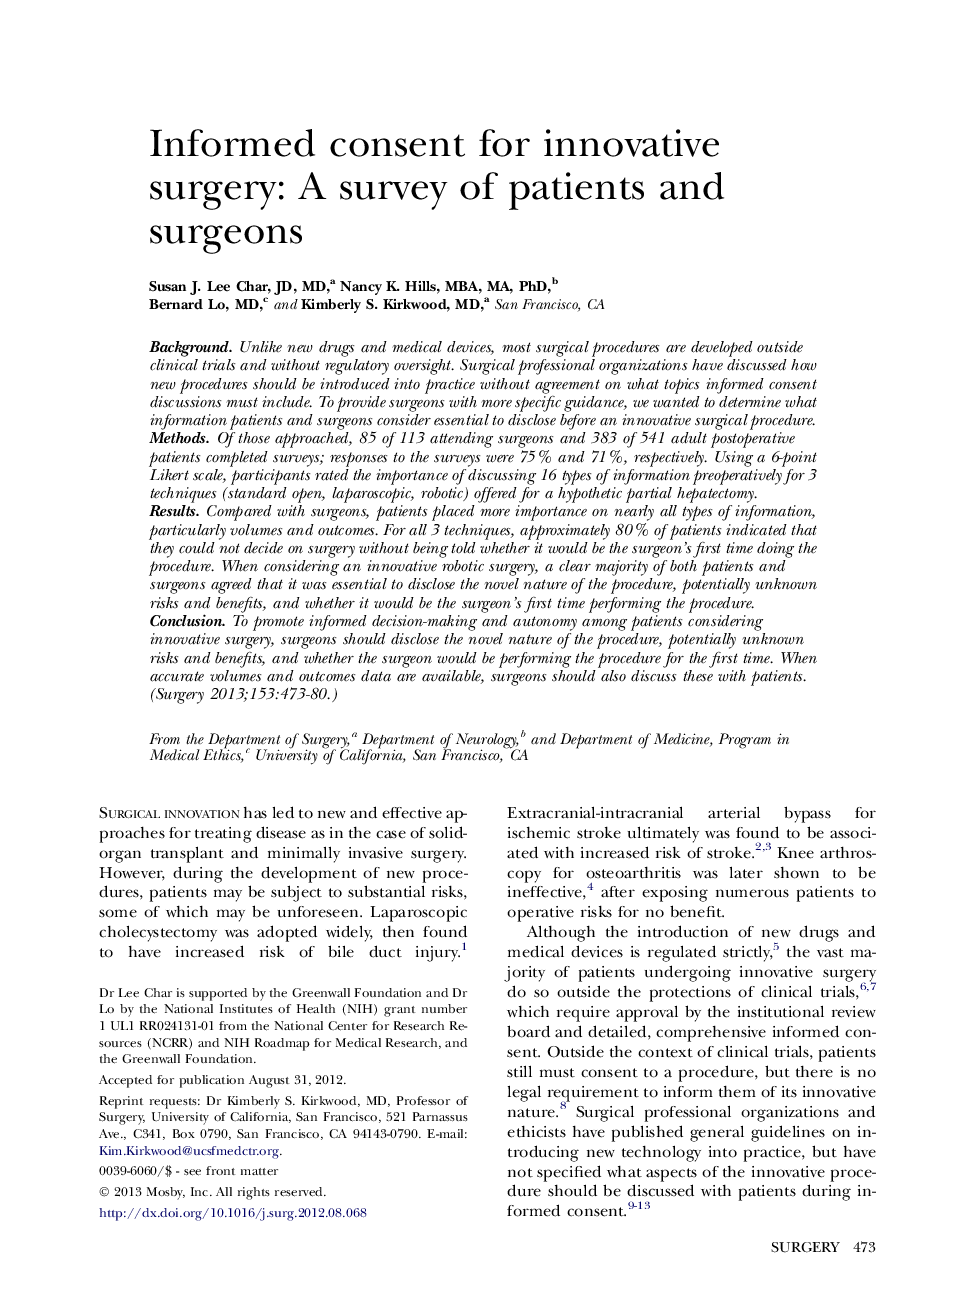 Informed consent for innovative surgery: A survey of patients and surgeons 